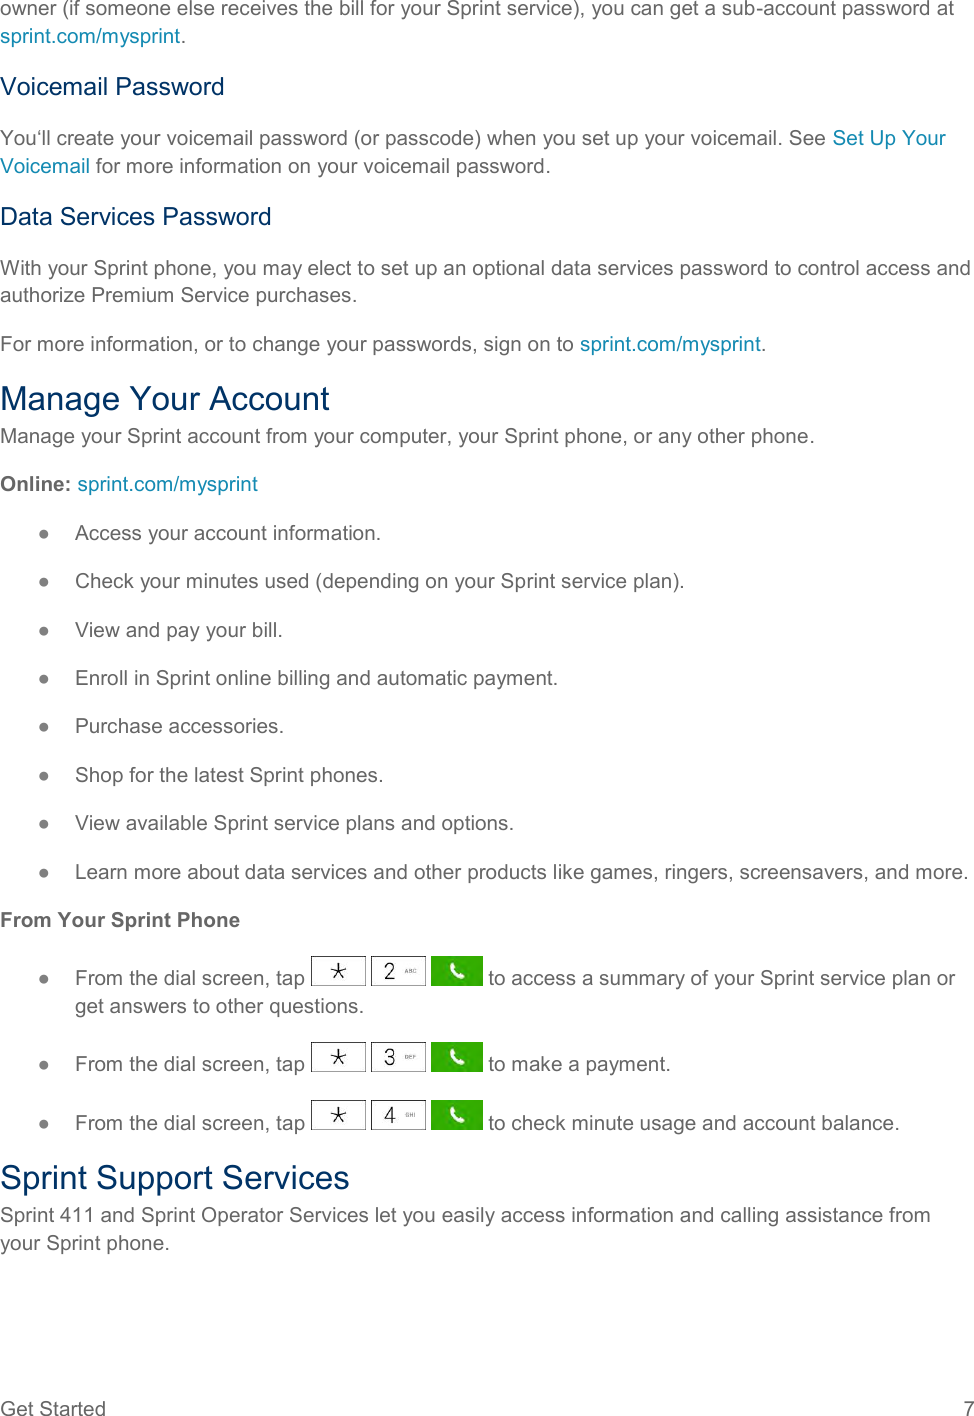 Get Started  7 owner (if someone else receives the bill for your Sprint service), you can get a sub-account password at sprint.com/mysprint. Voicemail Password You‘ll create your voicemail password (or passcode) when you set up your voicemail. See Set Up Your Voicemail for more information on your voicemail password. Data Services Password With your Sprint phone, you may elect to set up an optional data services password to control access and authorize Premium Service purchases. For more information, or to change your passwords, sign on to sprint.com/mysprint. Manage Your Account Manage your Sprint account from your computer, your Sprint phone, or any other phone. Online: sprint.com/mysprint ●  Access your account information. ●  Check your minutes used (depending on your Sprint service plan). ●  View and pay your bill. ●  Enroll in Sprint online billing and automatic payment. ●  Purchase accessories. ●  Shop for the latest Sprint phones. ●  View available Sprint service plans and options. ●  Learn more about data services and other products like games, ringers, screensavers, and more. From Your Sprint Phone ●  From the dial screen, tap       to access a summary of your Sprint service plan or get answers to other questions. ●  From the dial screen, tap       to make a payment. ●  From the dial screen, tap       to check minute usage and account balance. Sprint Support Services Sprint 411 and Sprint Operator Services let you easily access information and calling assistance from your Sprint phone. 